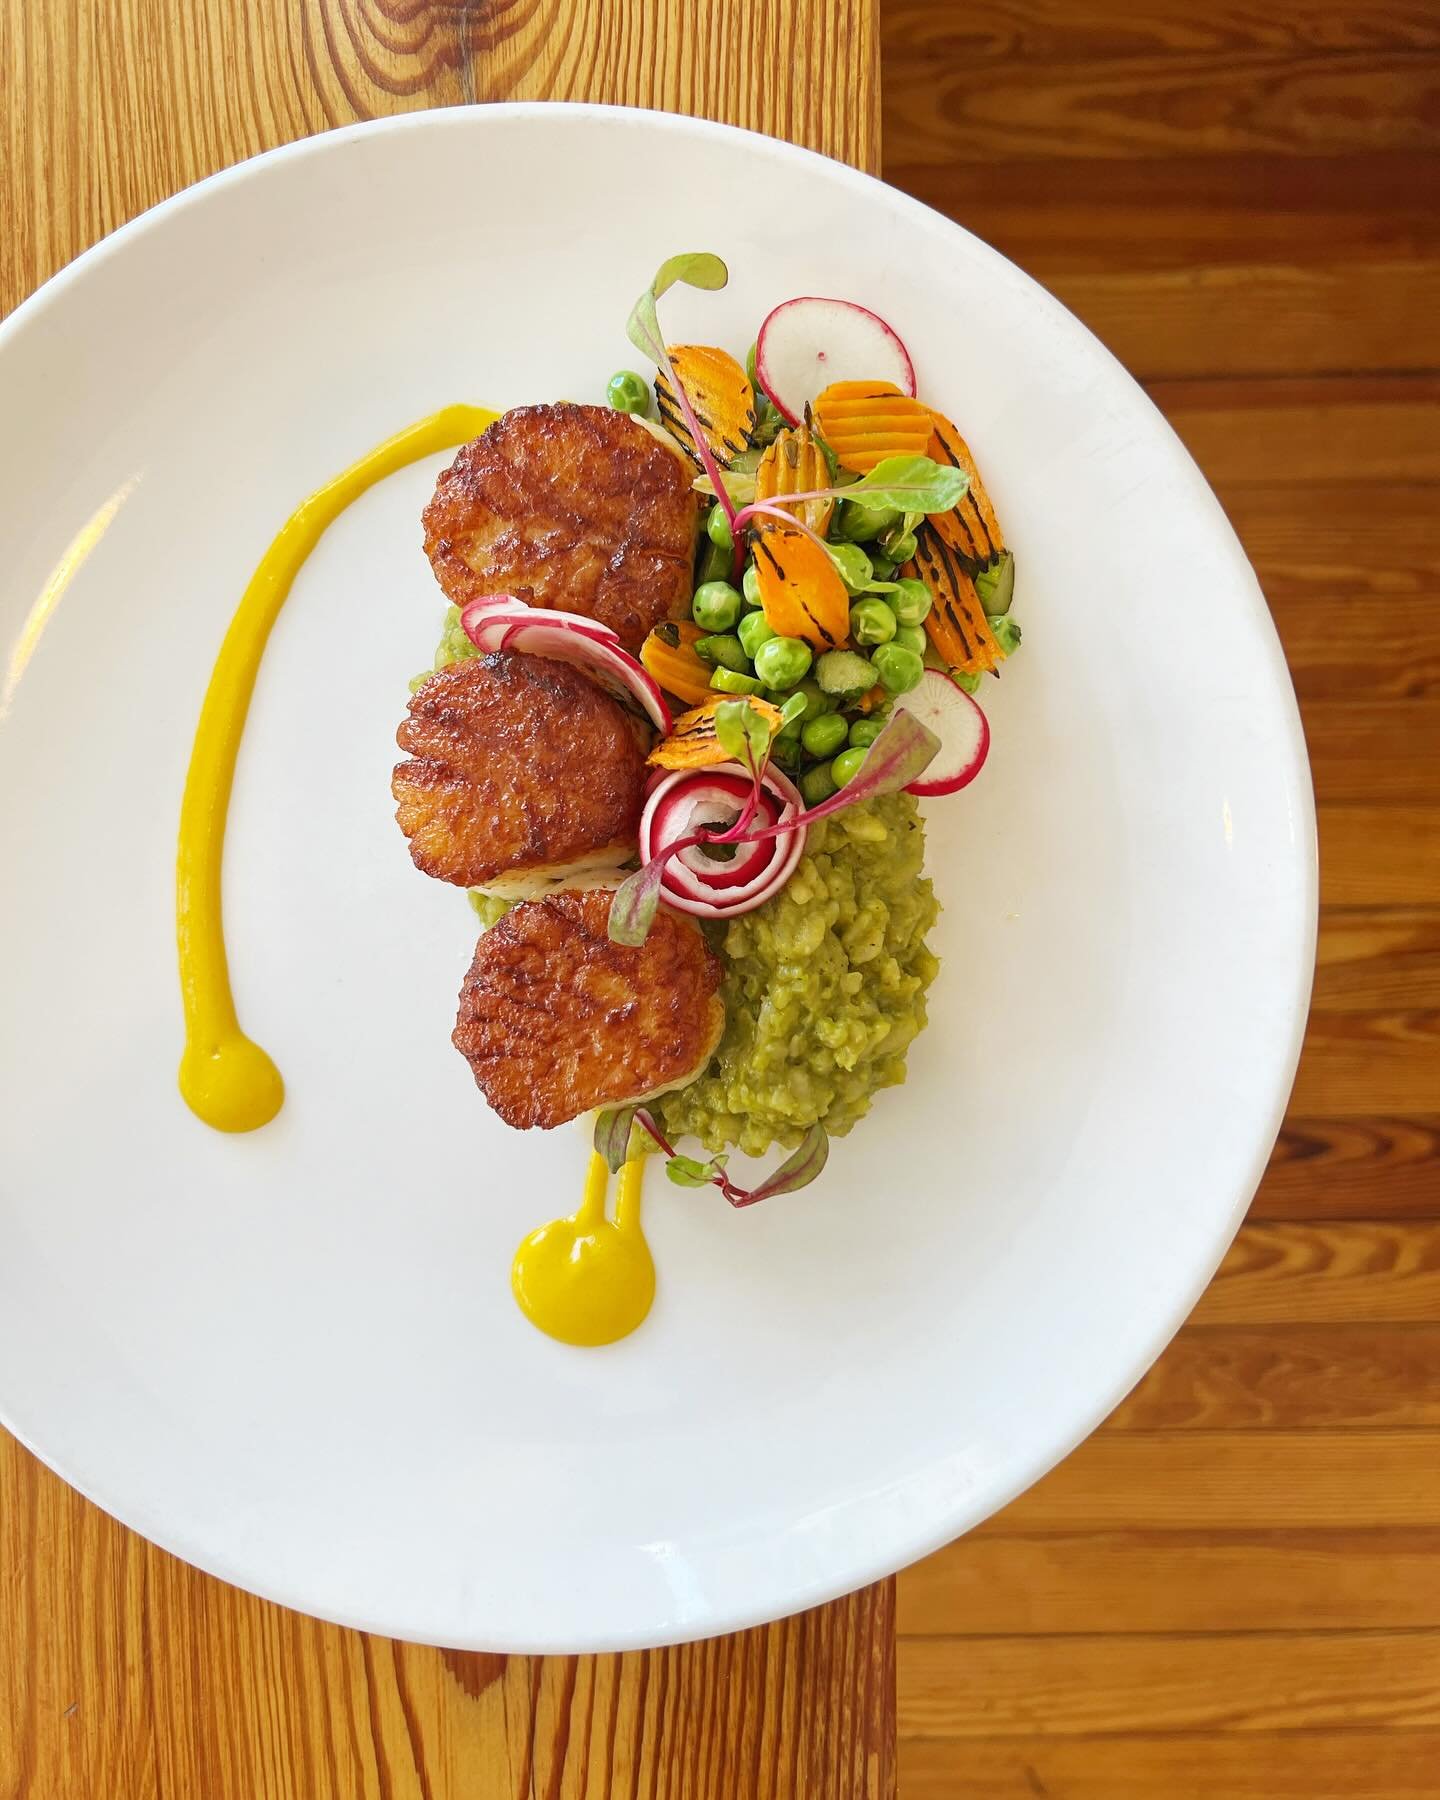 🌿spring vibes🌿

hitting our dinner menu tonight, 

pan seared new jersey scallops 
fifer orchard asparagus , charred spring onions,
english peas &amp; carrots in a basil butter 
with an english pea risotto and a 
balsamic carrot pur&eacute;e 🌷🌿🌻